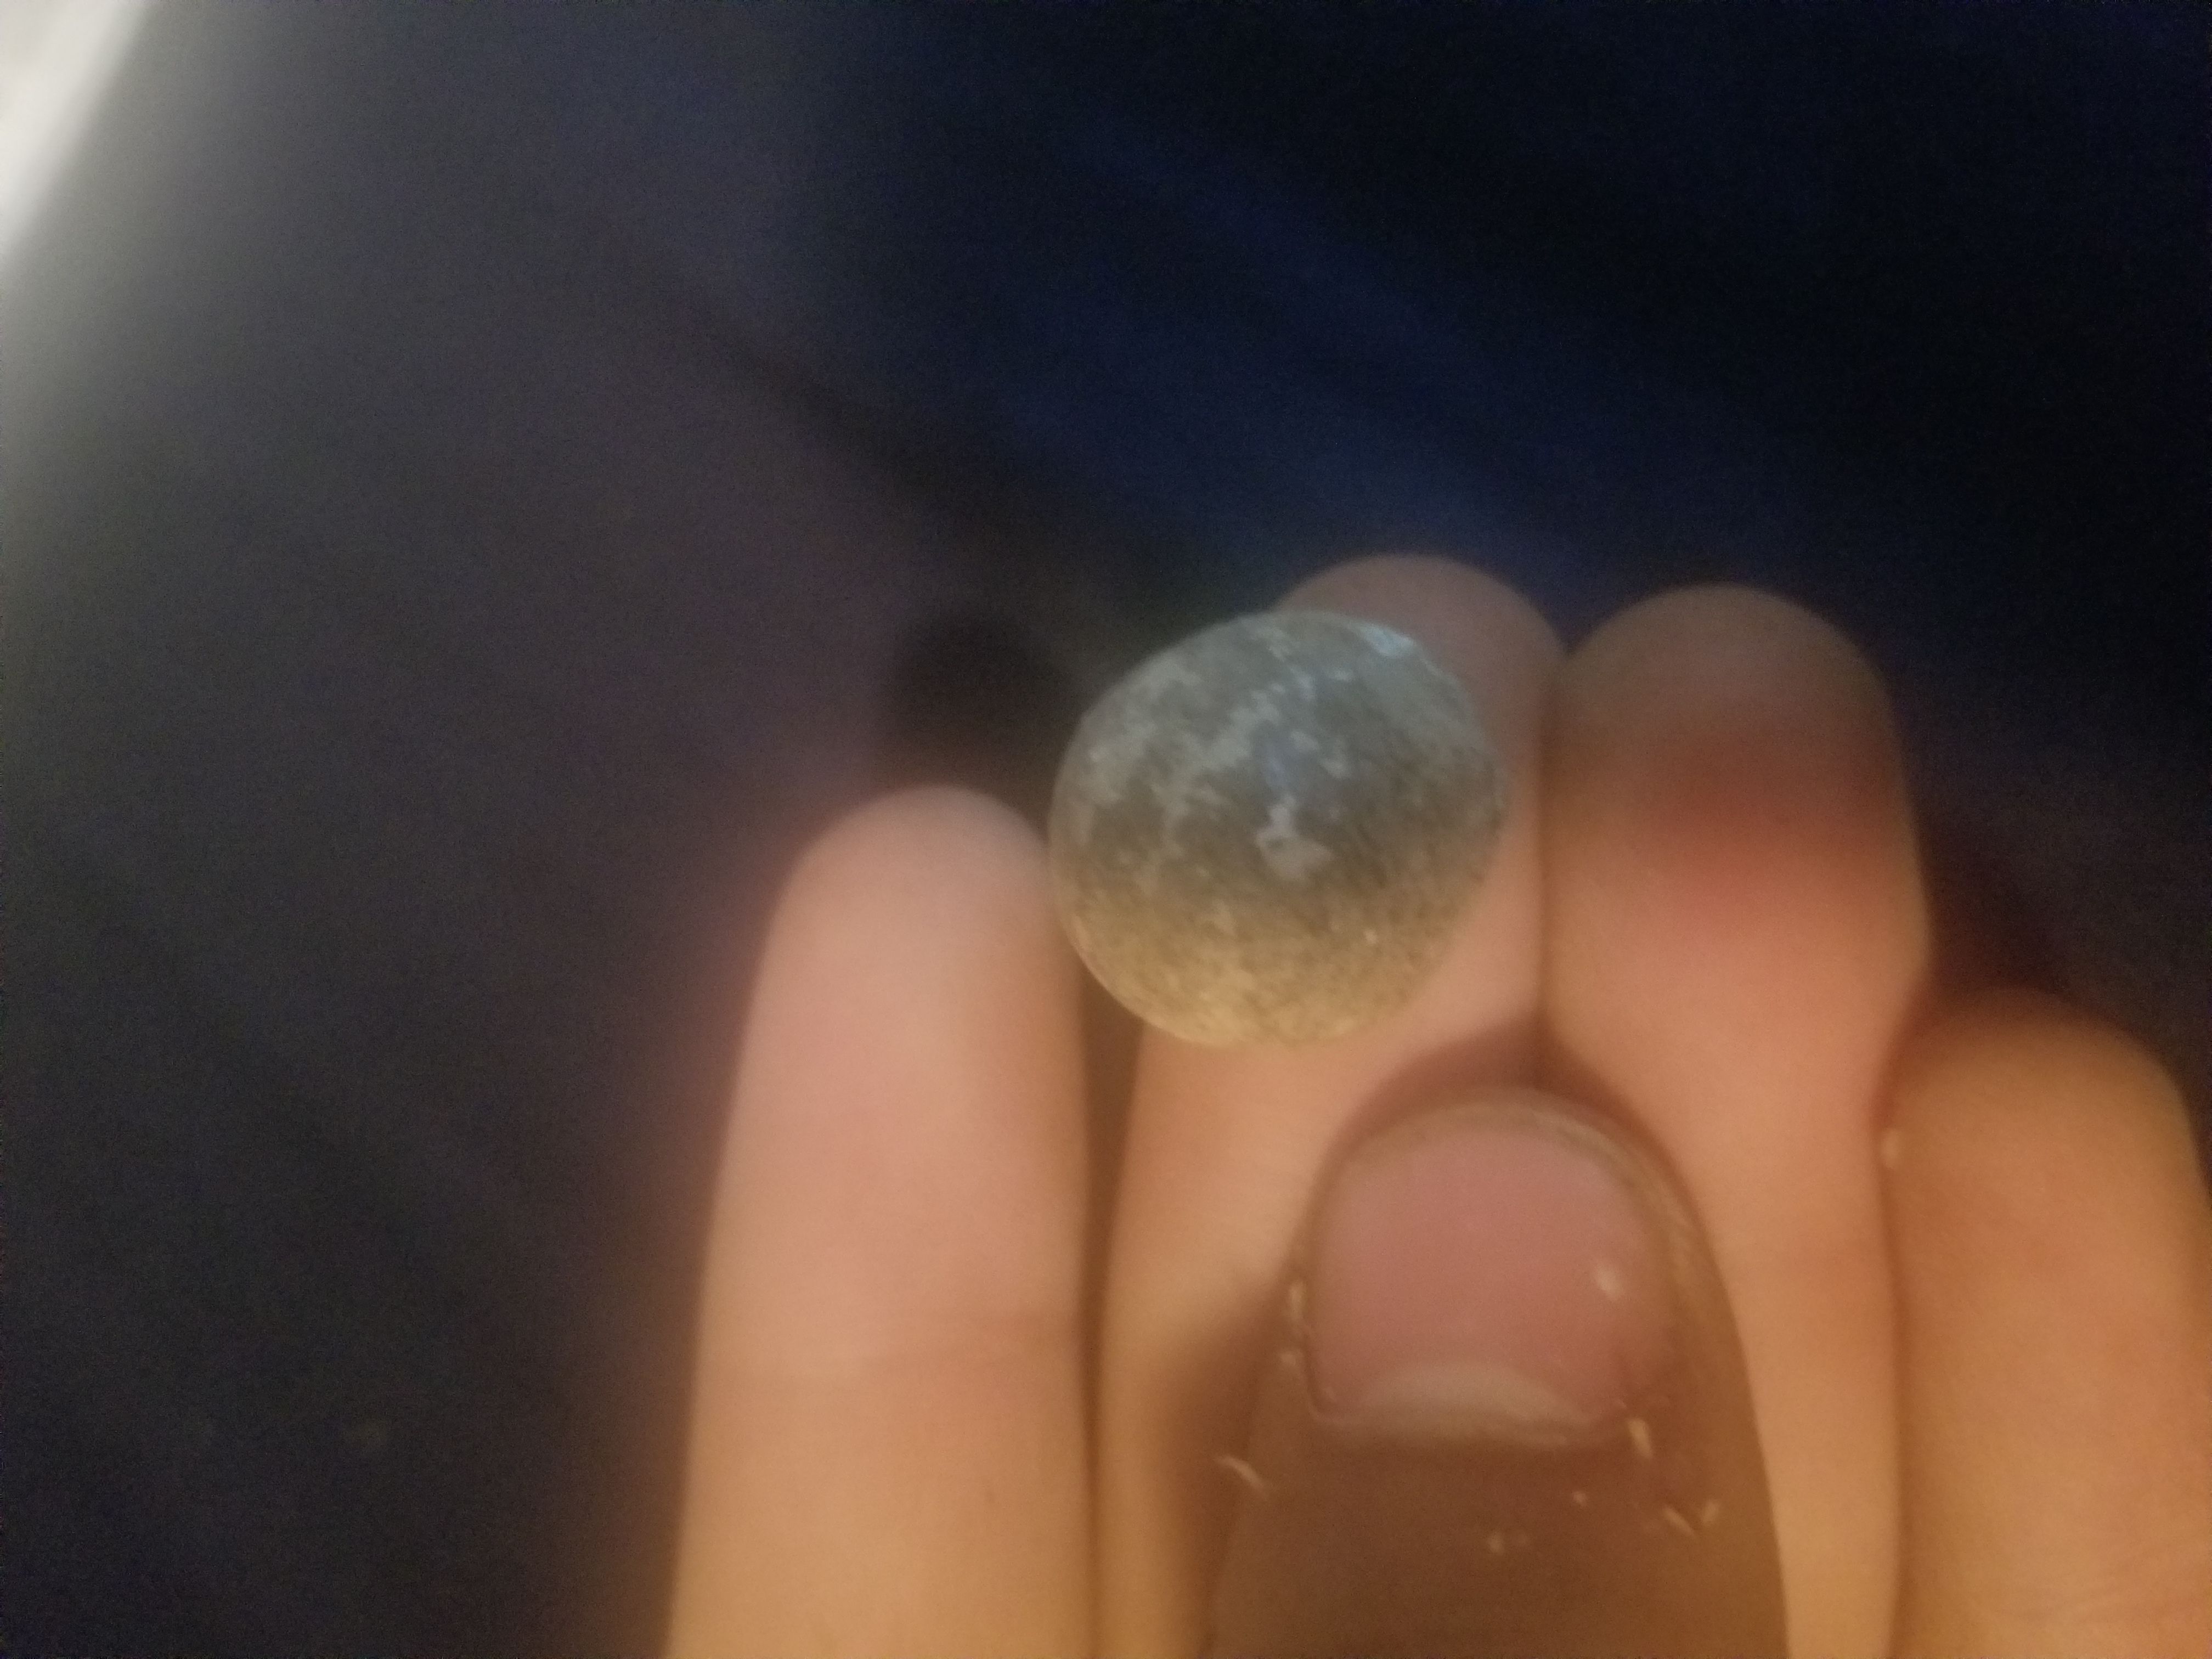 First musketball find behind my house